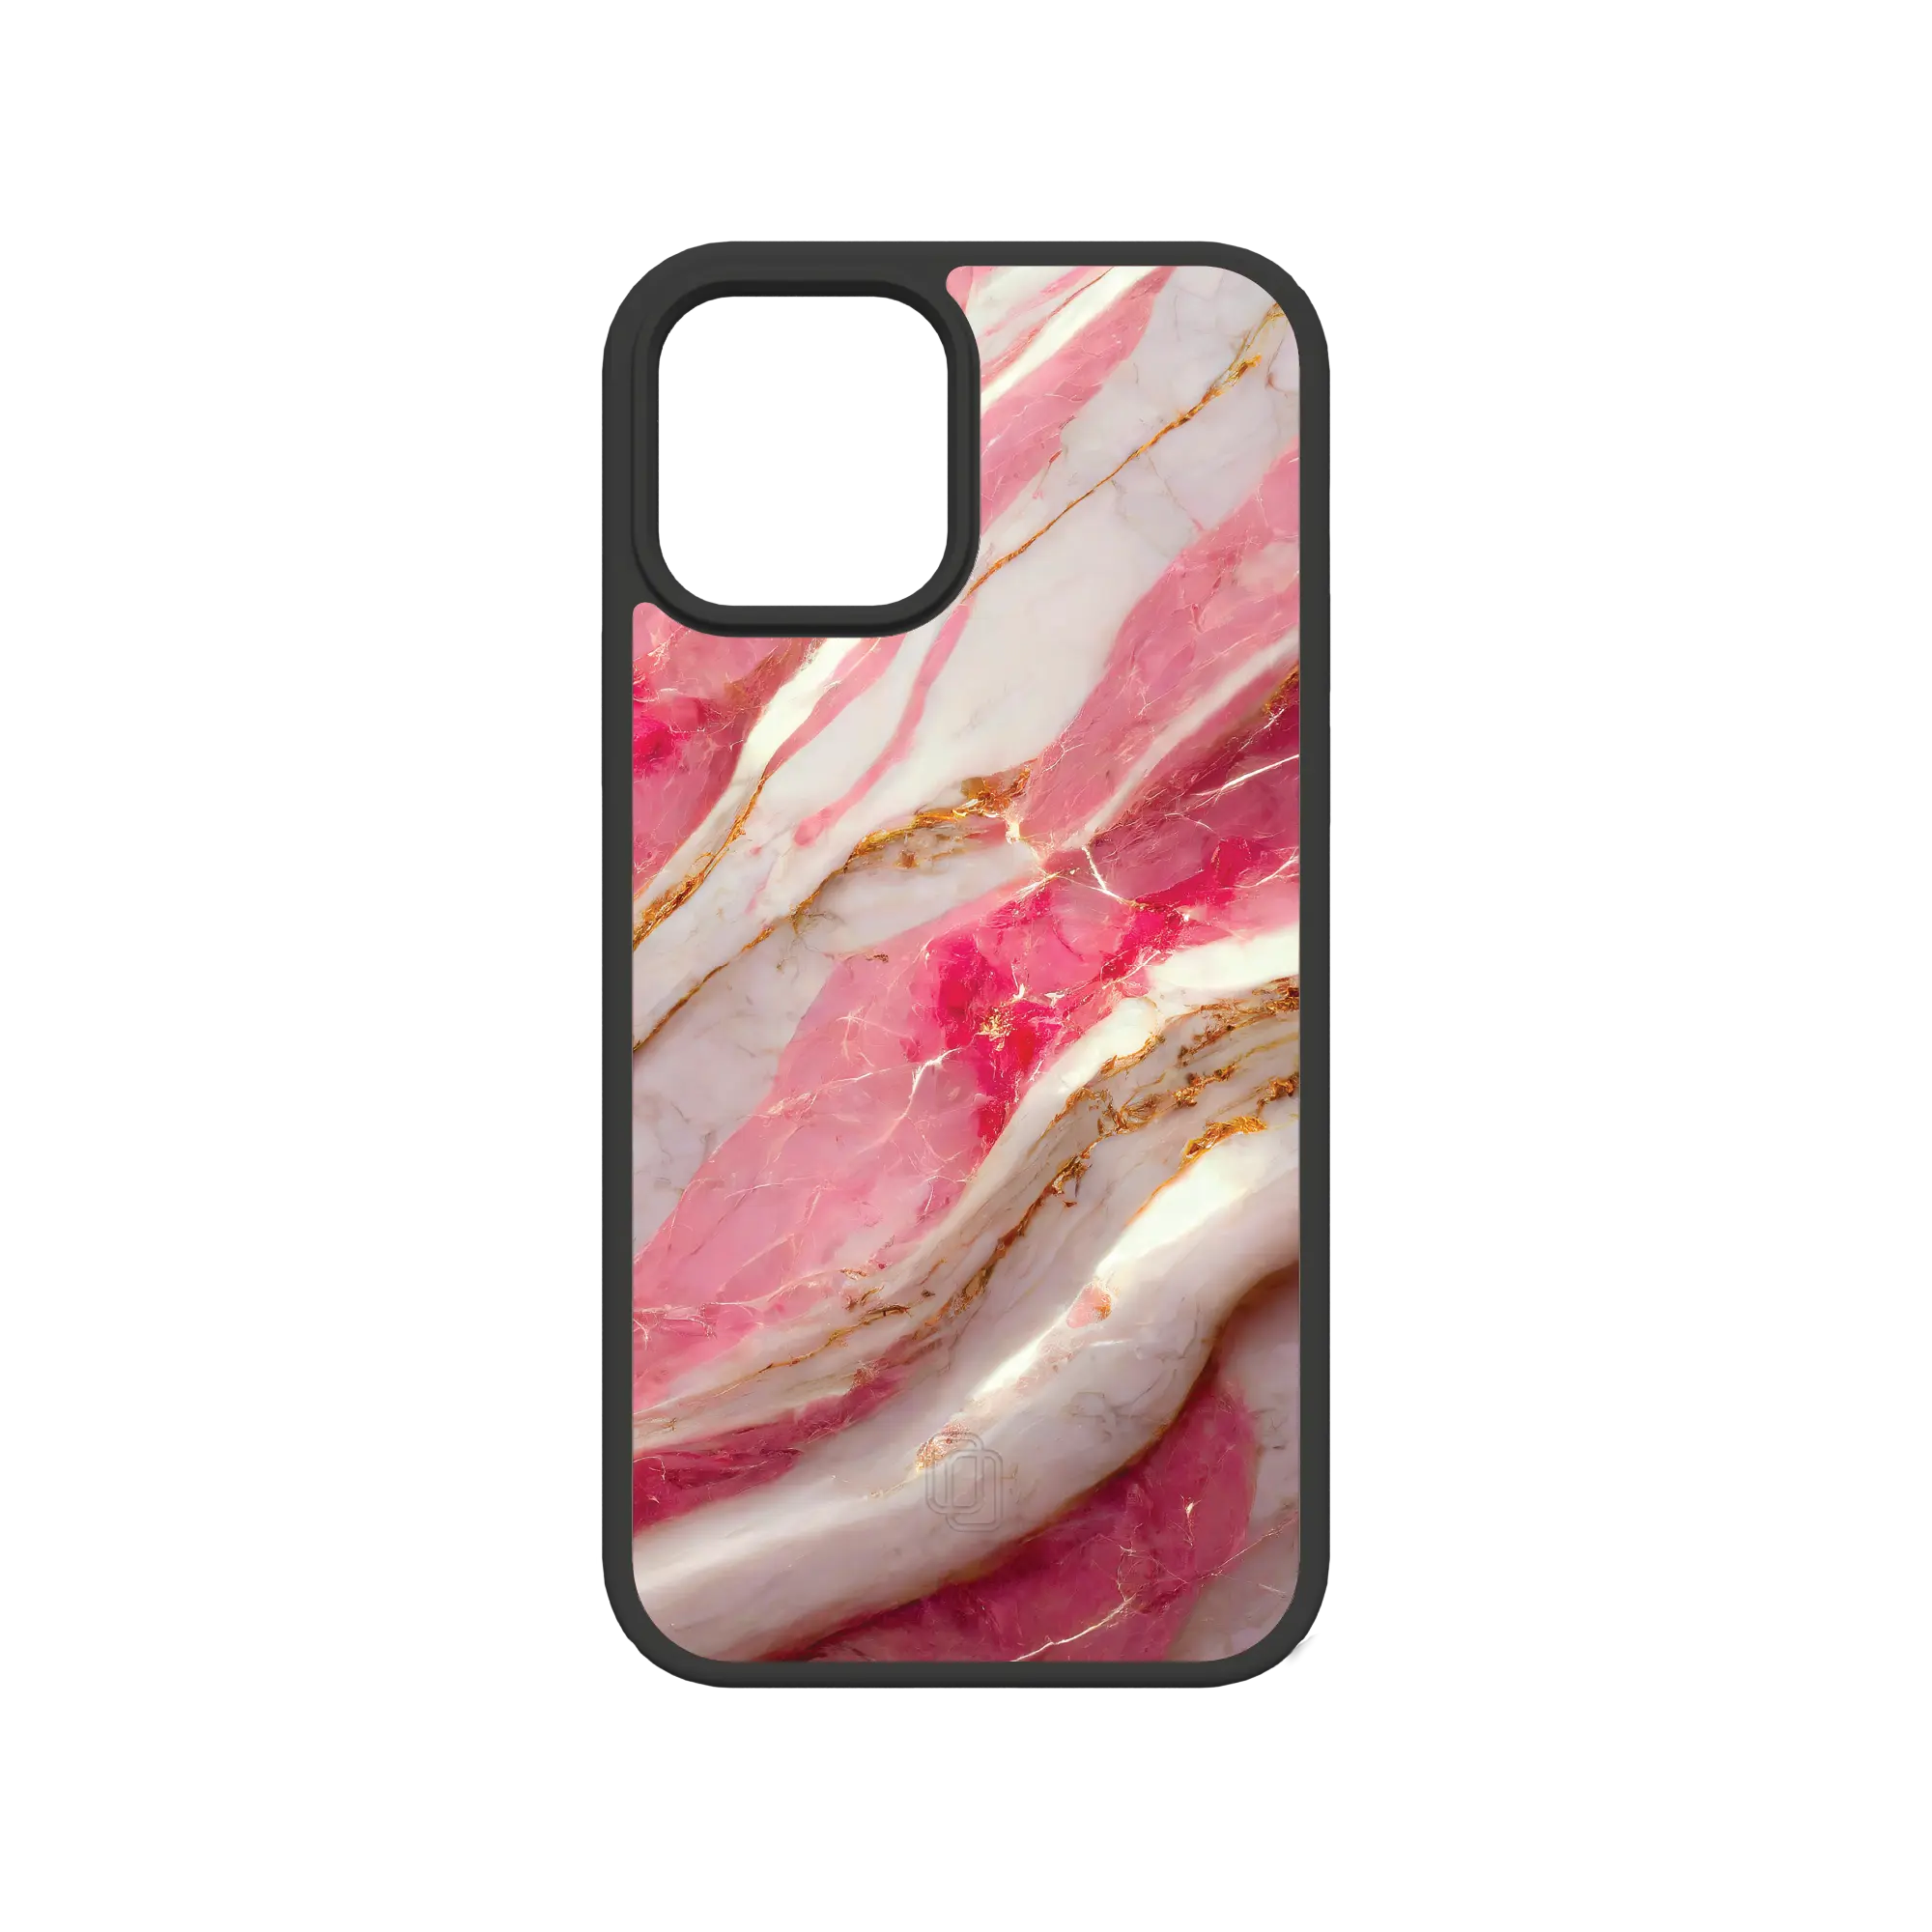 Apple-iPhone-12-12-Pro-Crystal-Clear New Dawn | Protective MagSafe Pink Marble Case | Marble Stone Collection for Apple iPhone 12 Series cellhelmet cellhelmet